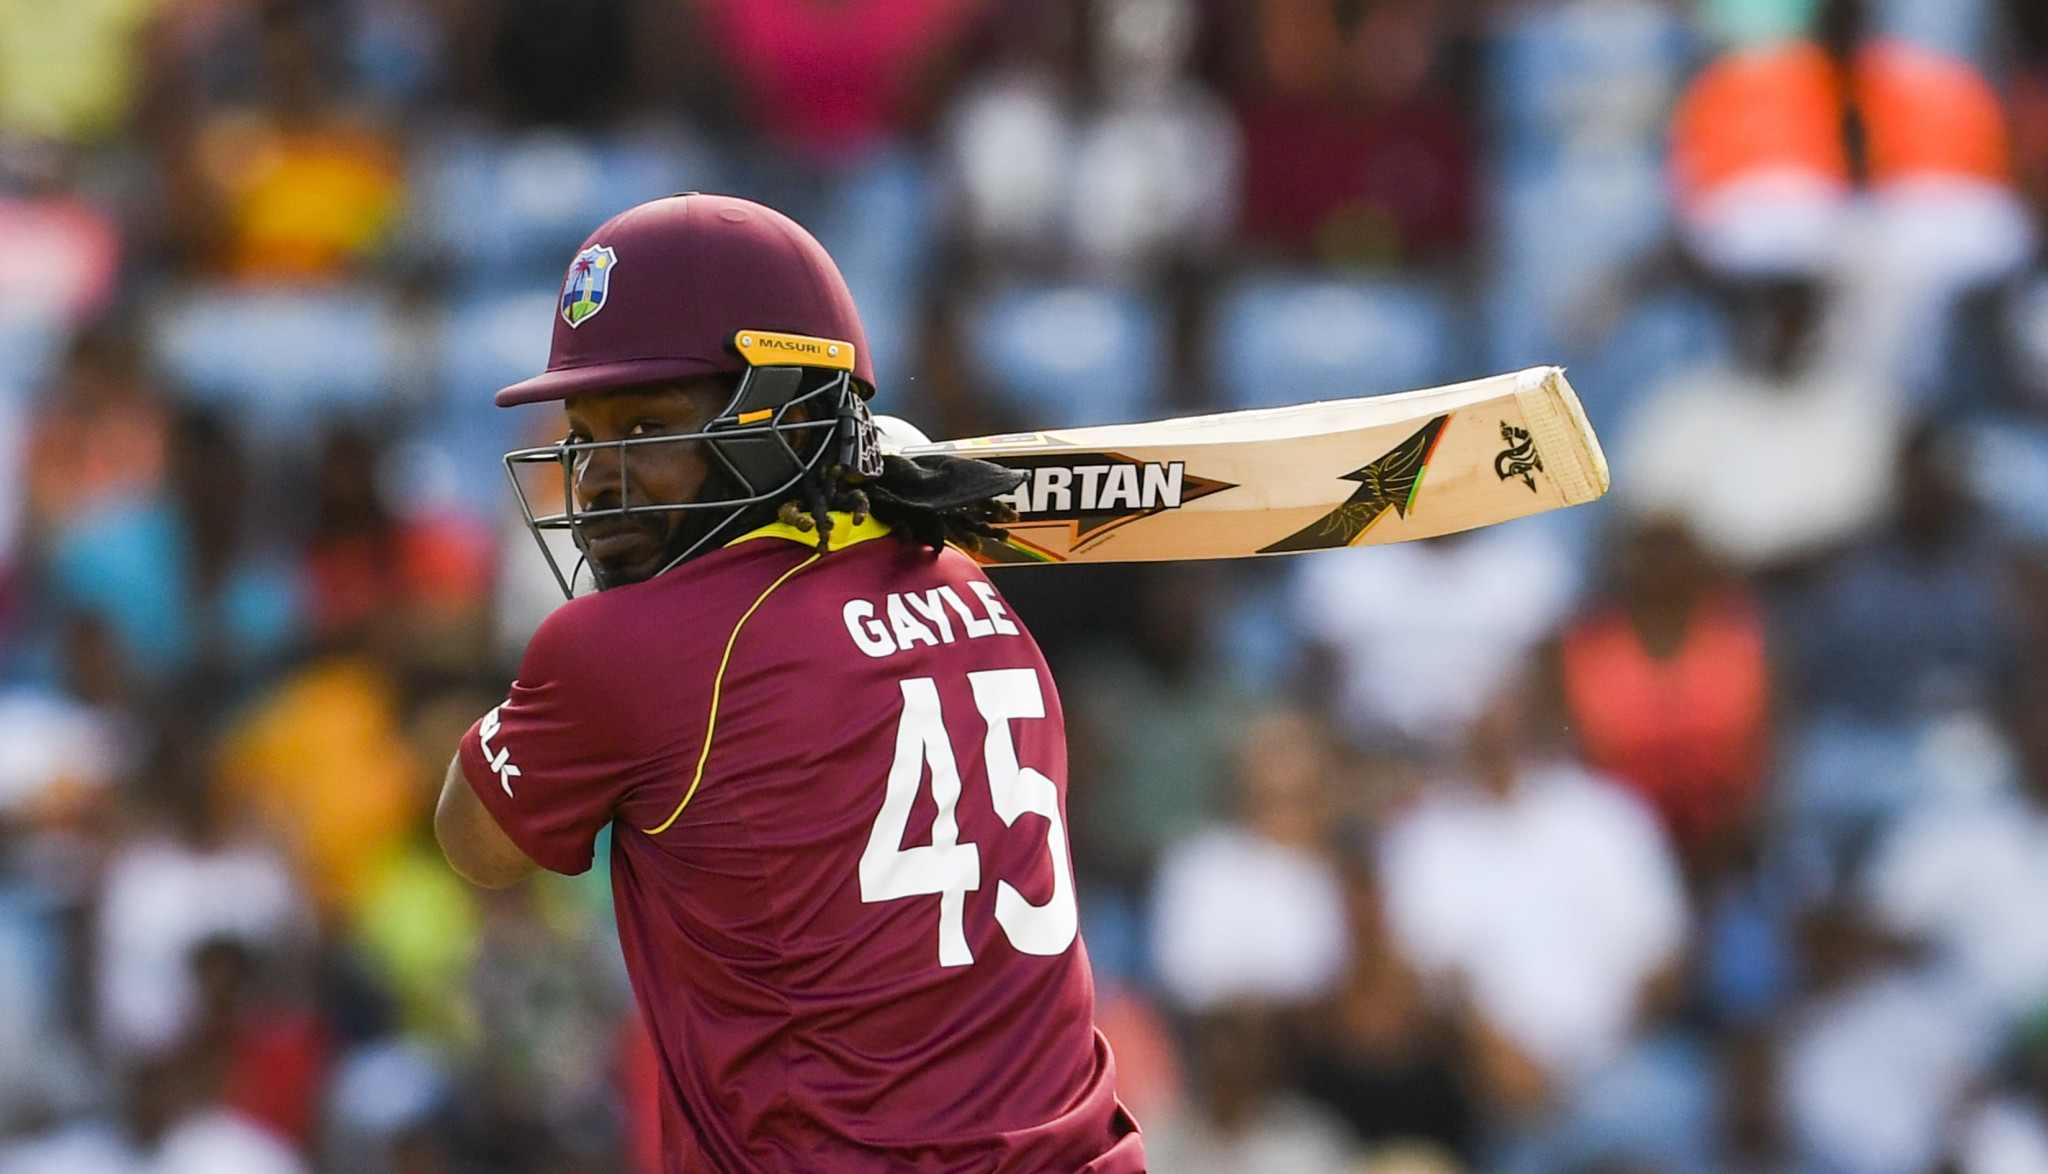 The Everest Premier League, which was due to feature West Indies player Chris Gayle, has also been postponed due to coronavirus ©Getty Images